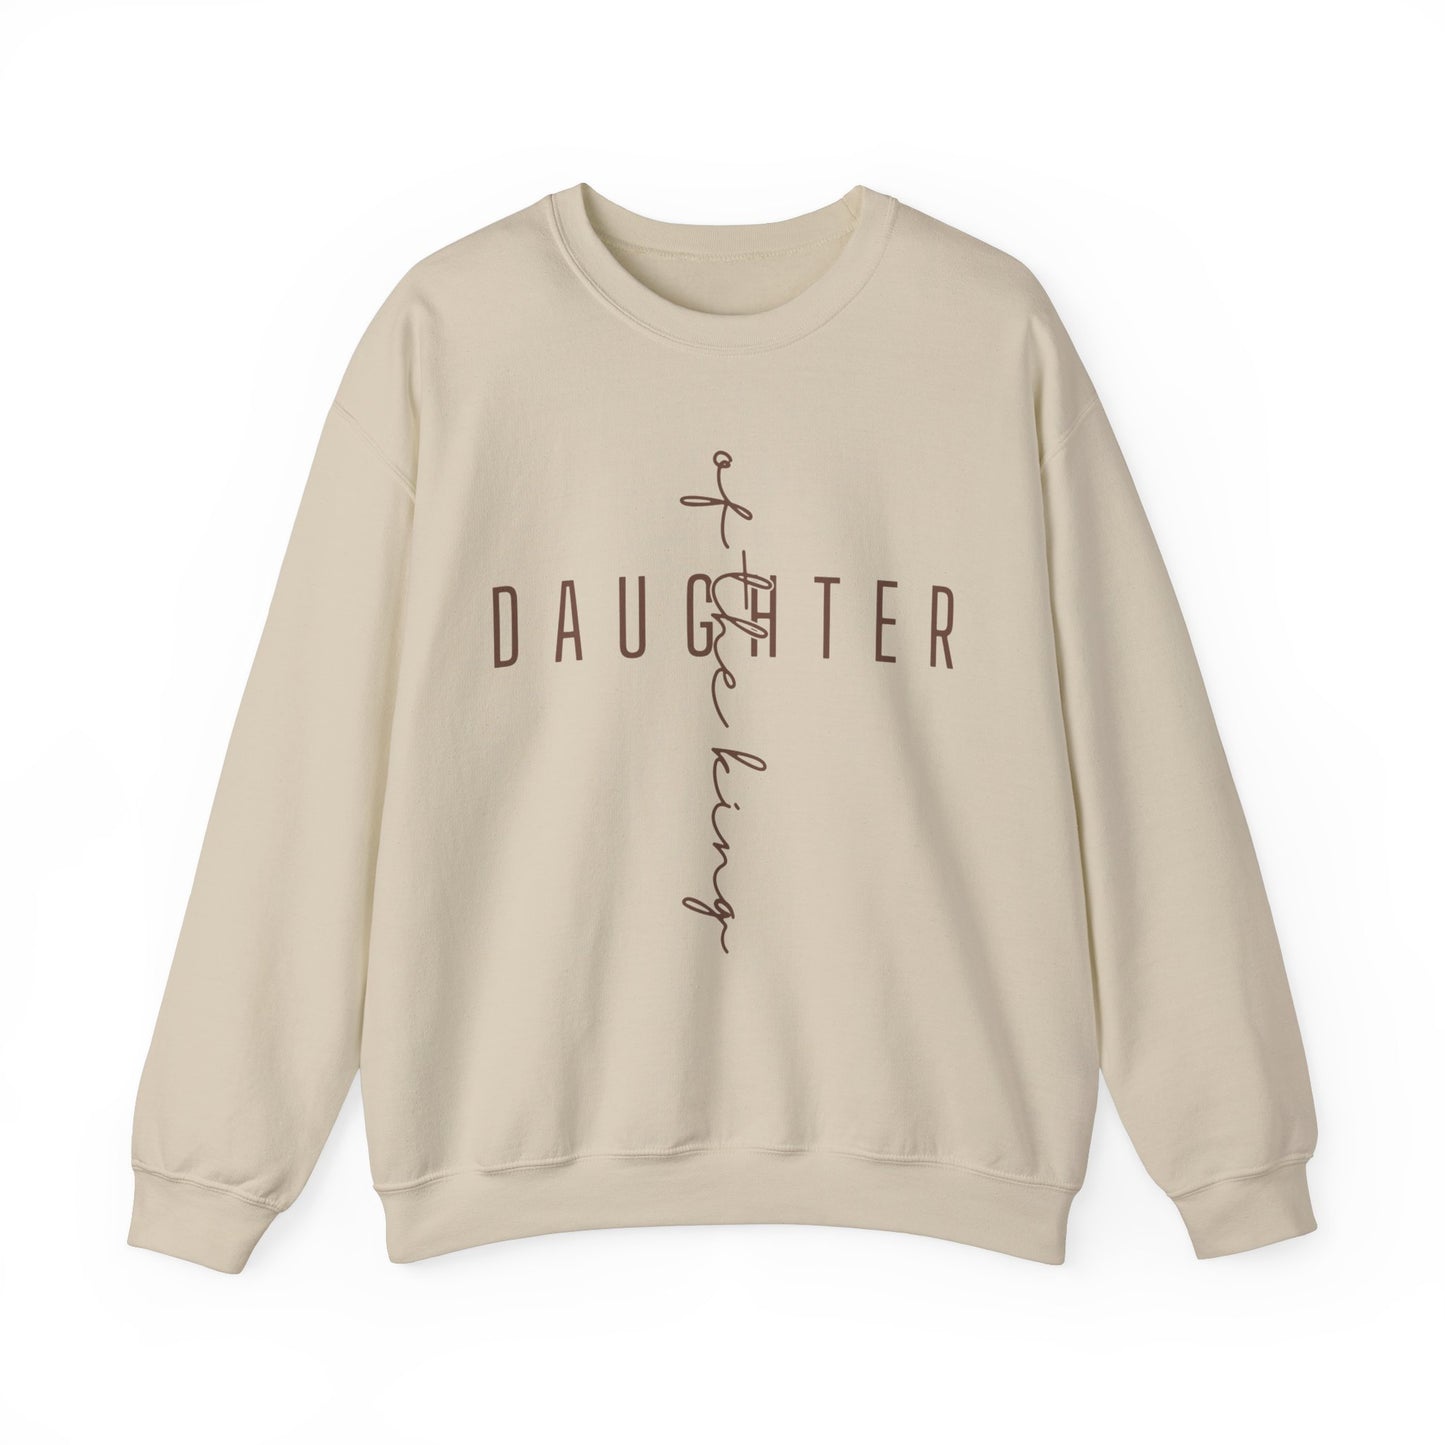 Daughter Of The King Scripture Crewneck For Women, Perfect For Religious Students, Teachers, Perfect Gift For Christian Faith, Catholic School Gift & Faithful Individuals